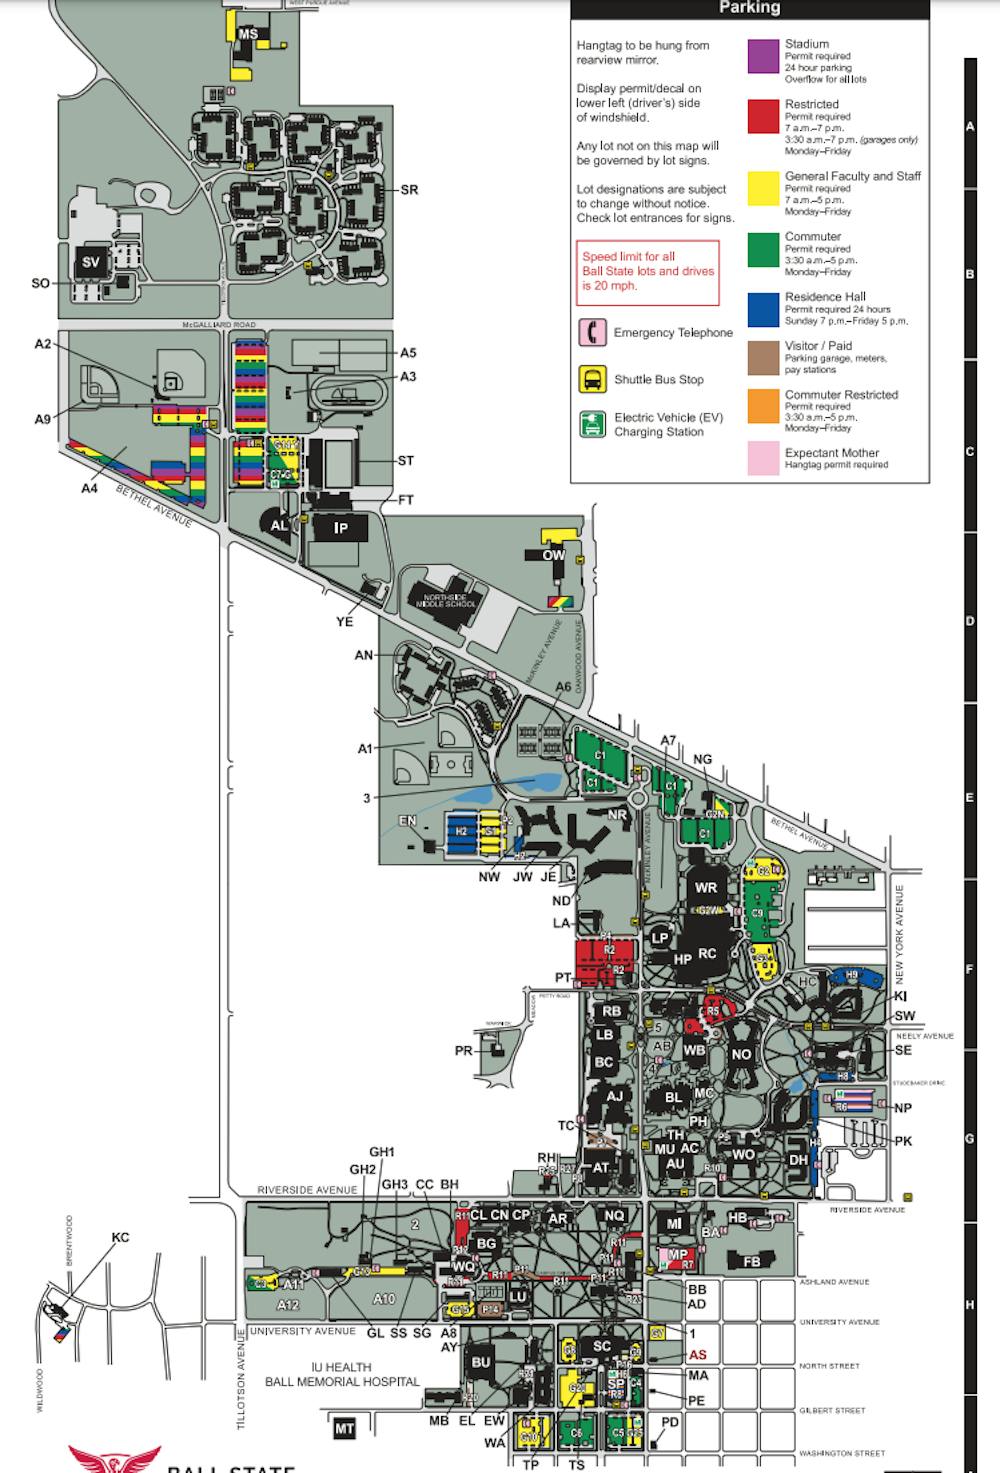 Where to Park at BSU - Ball State Daily